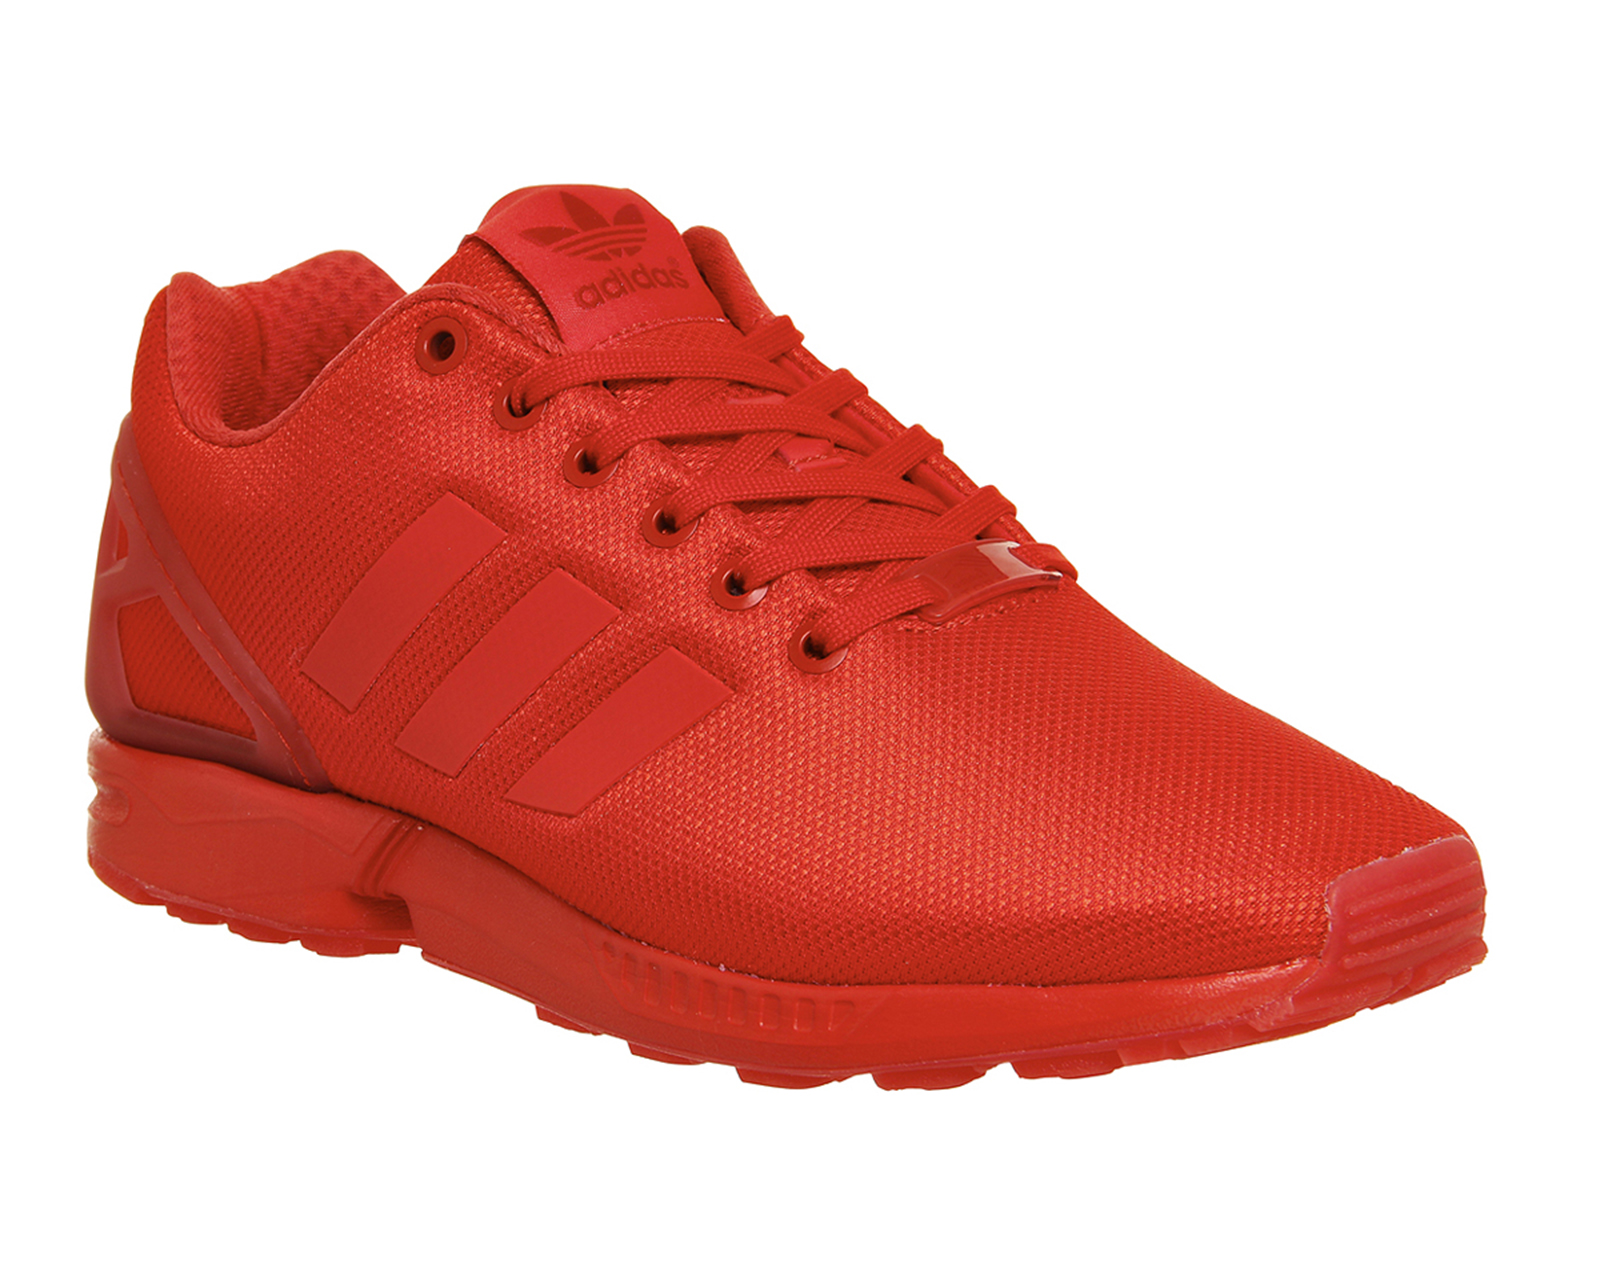 adidas zx flux red 6.5